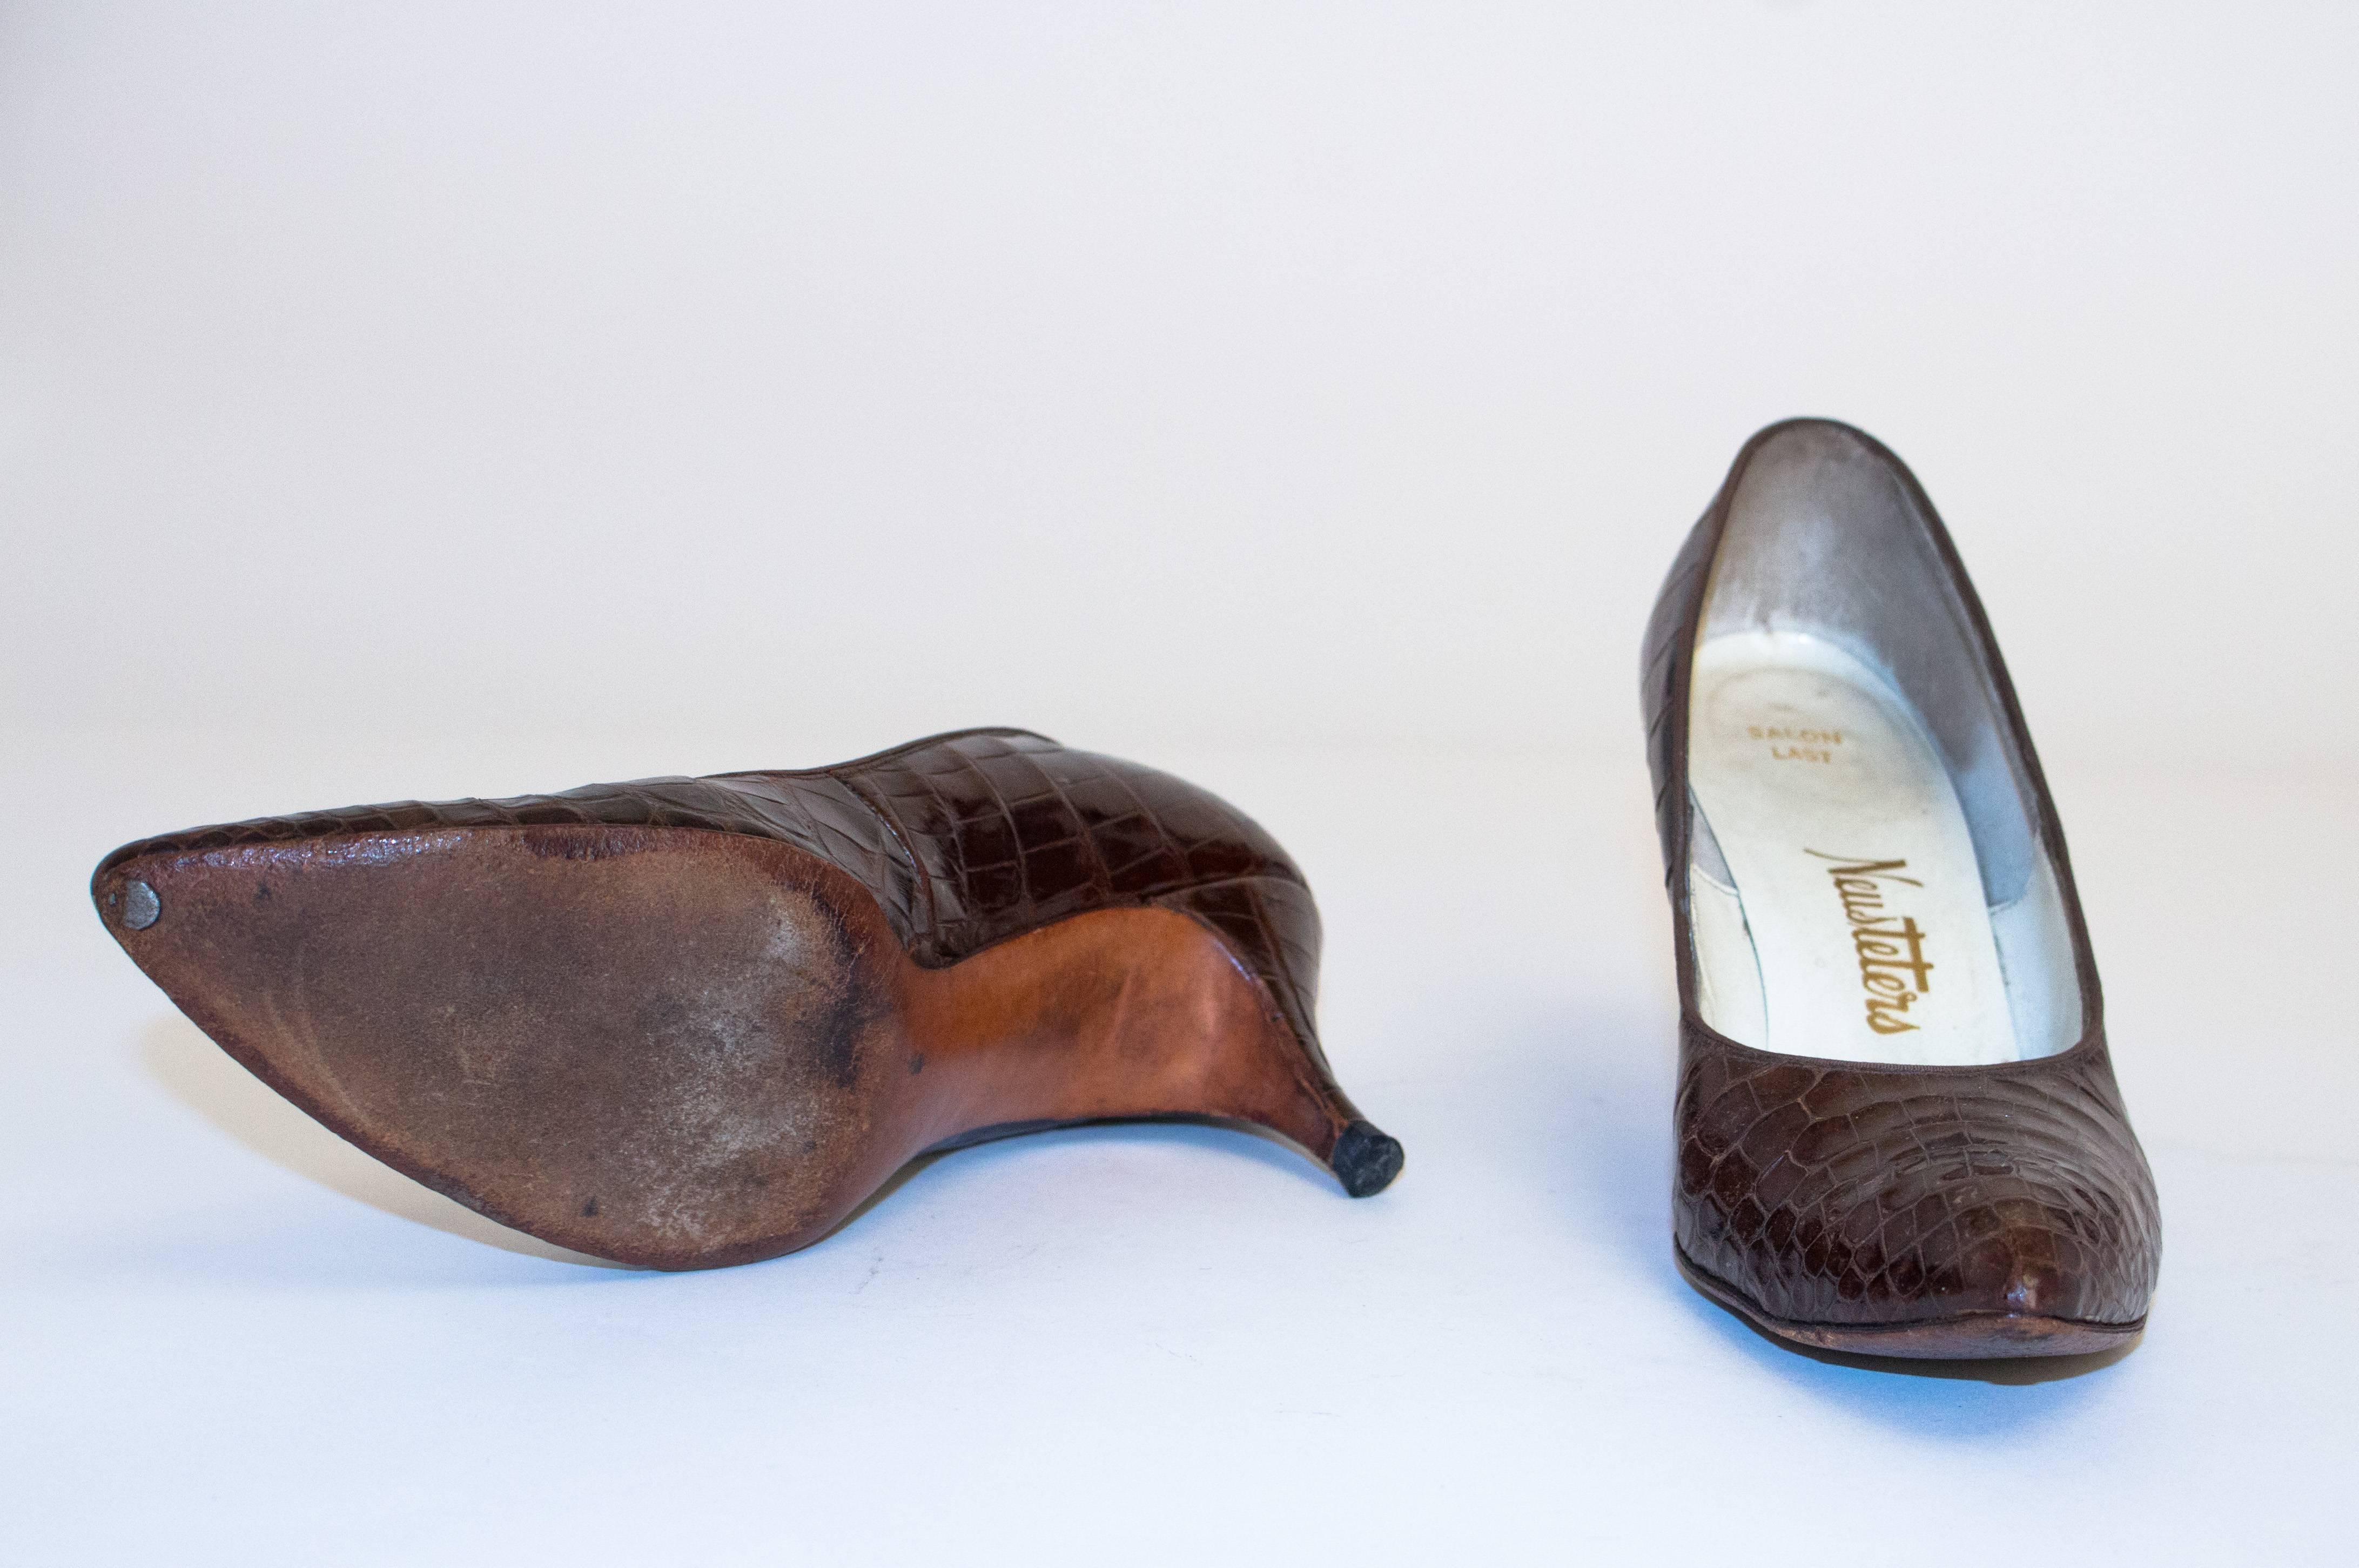 1950s alligator heels. Leather sole. US 7 narrow.

Palm of foot: 2 1/2